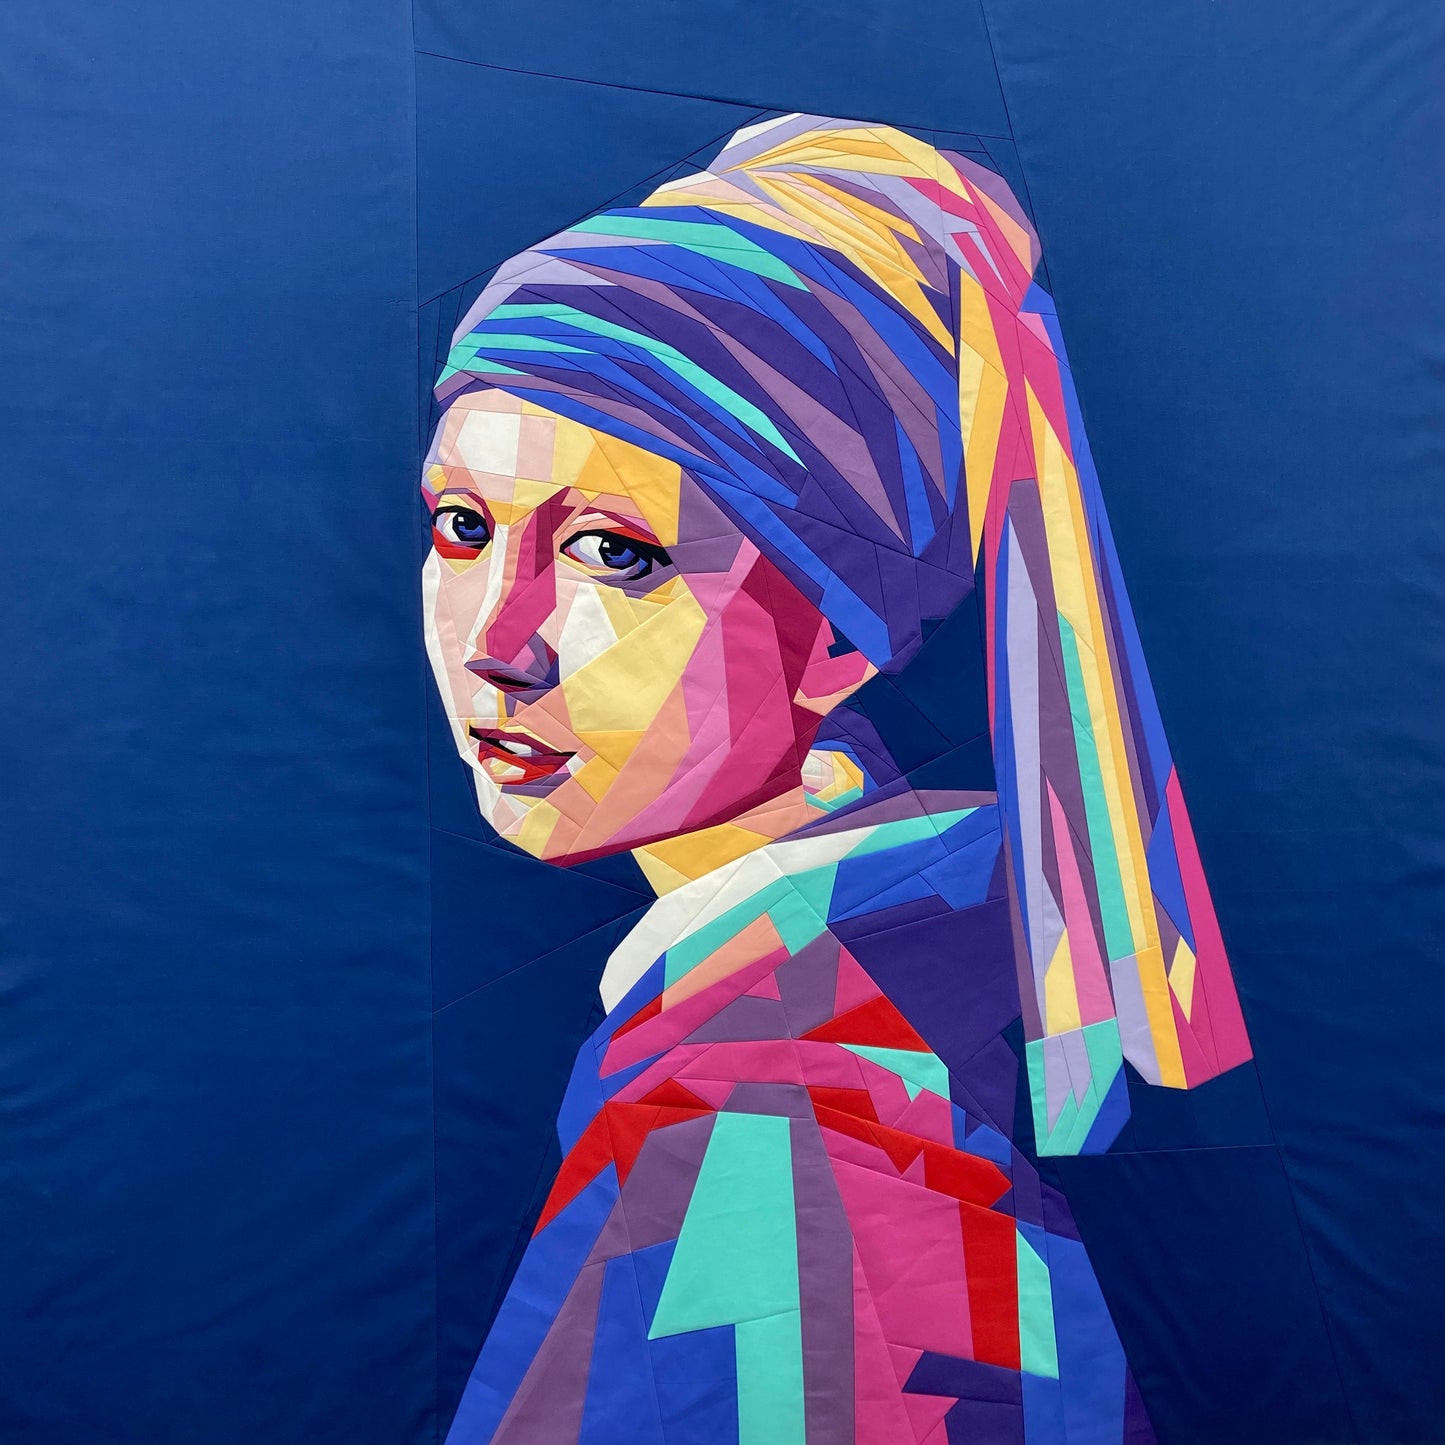 Girl With The Pearl Earring QUILT KIT